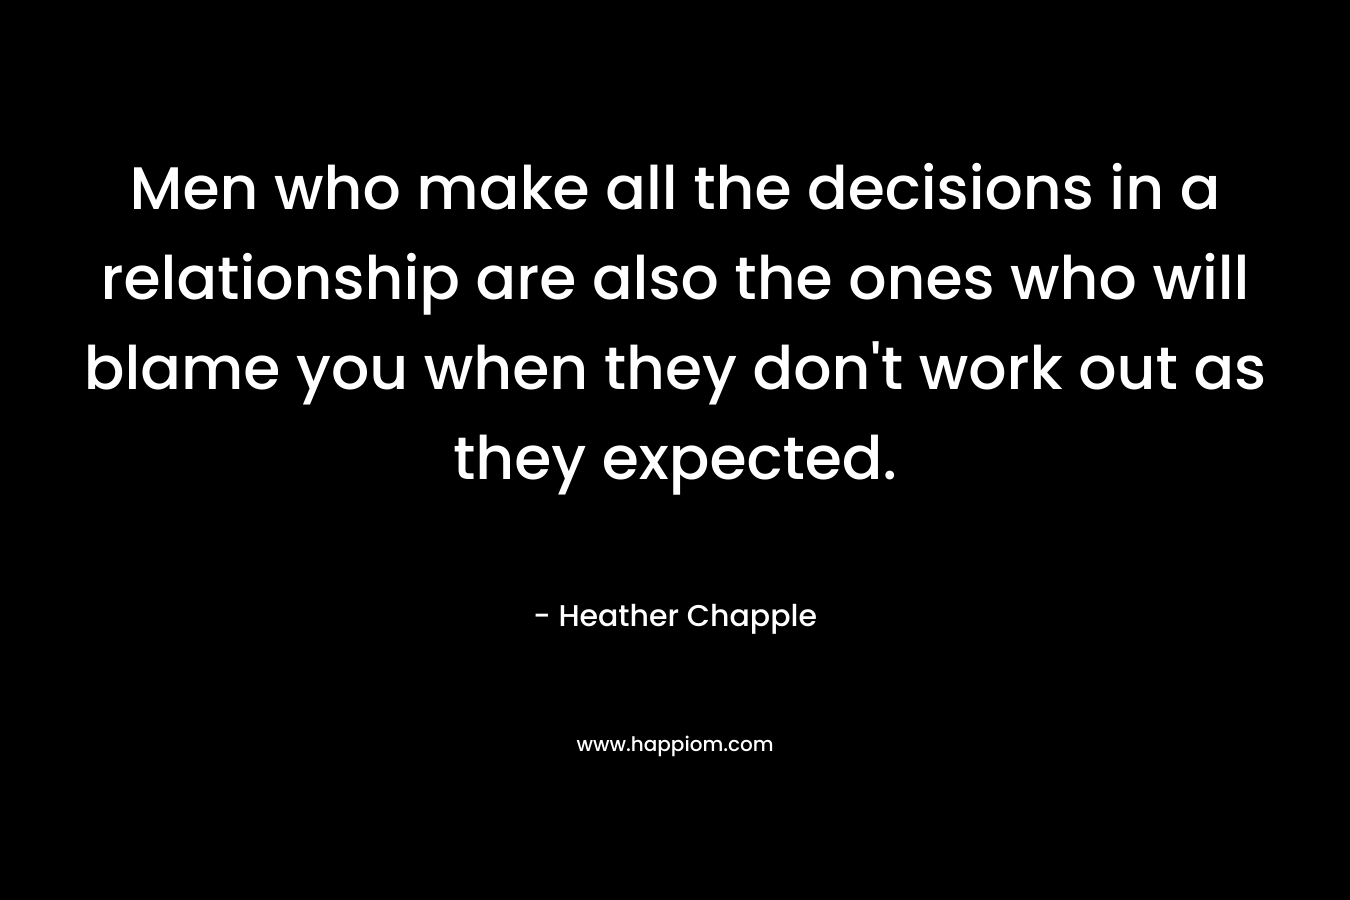 Men who make all the decisions in a relationship are also the ones who will blame you when they don’t work out as they expected. – Heather Chapple